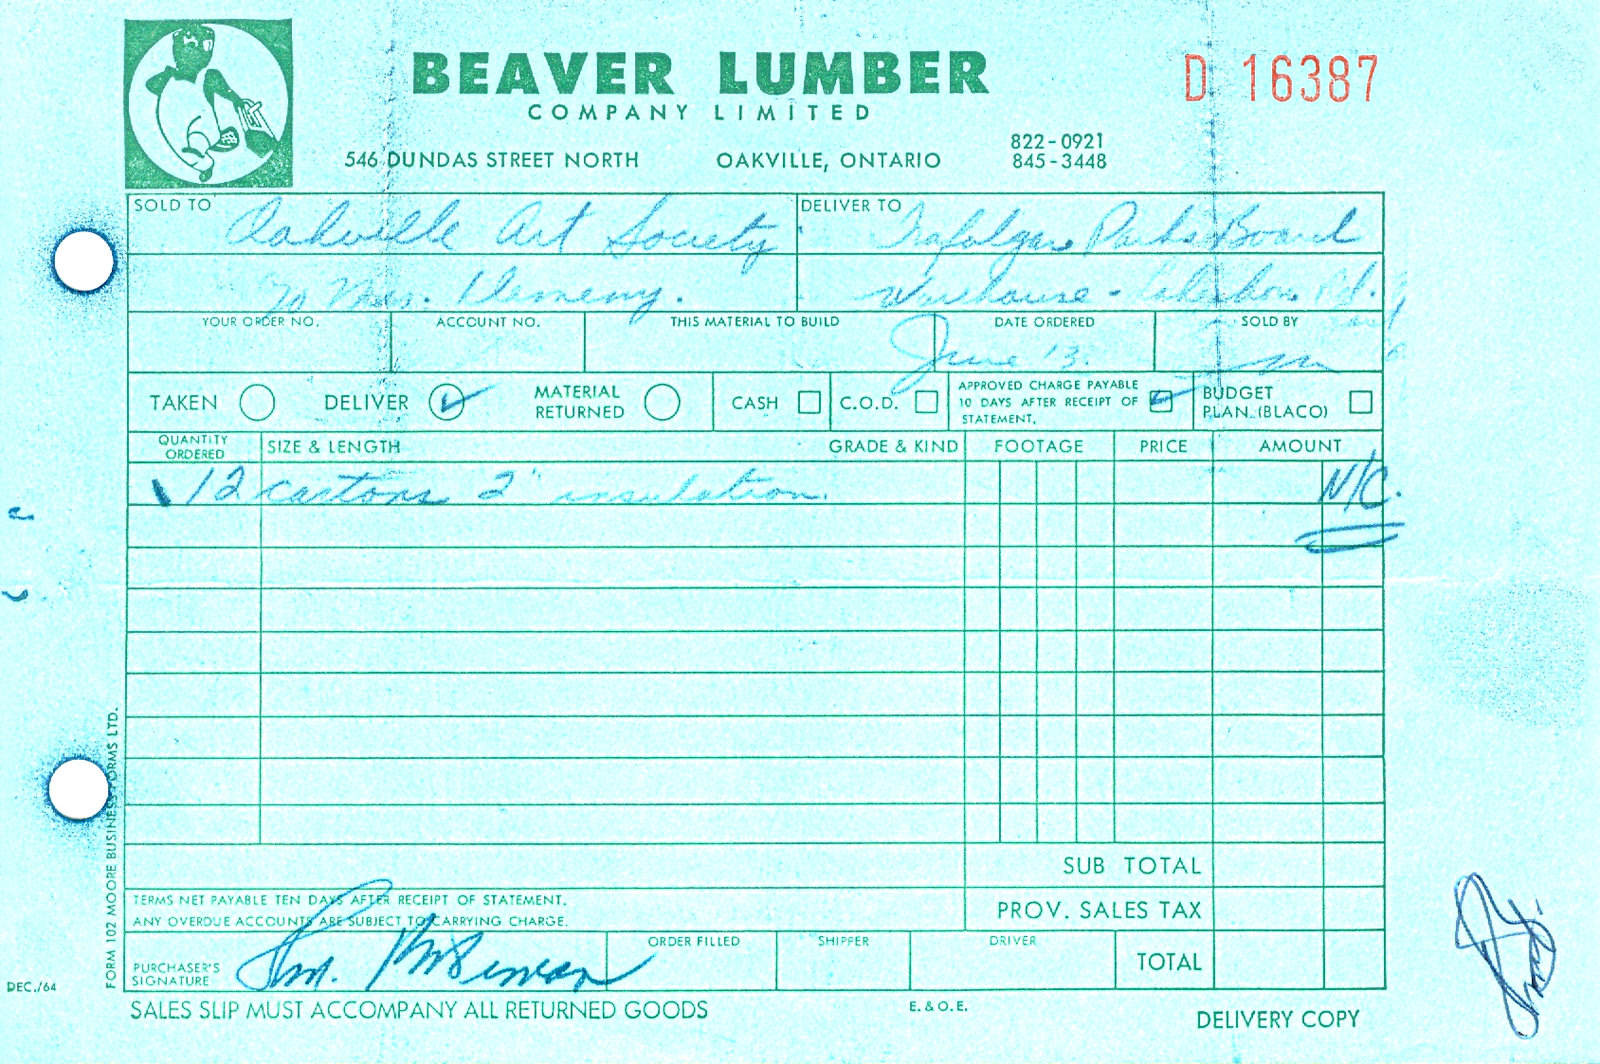 receipt-from-beaver-lumber-showing-no-charge-oakville-images